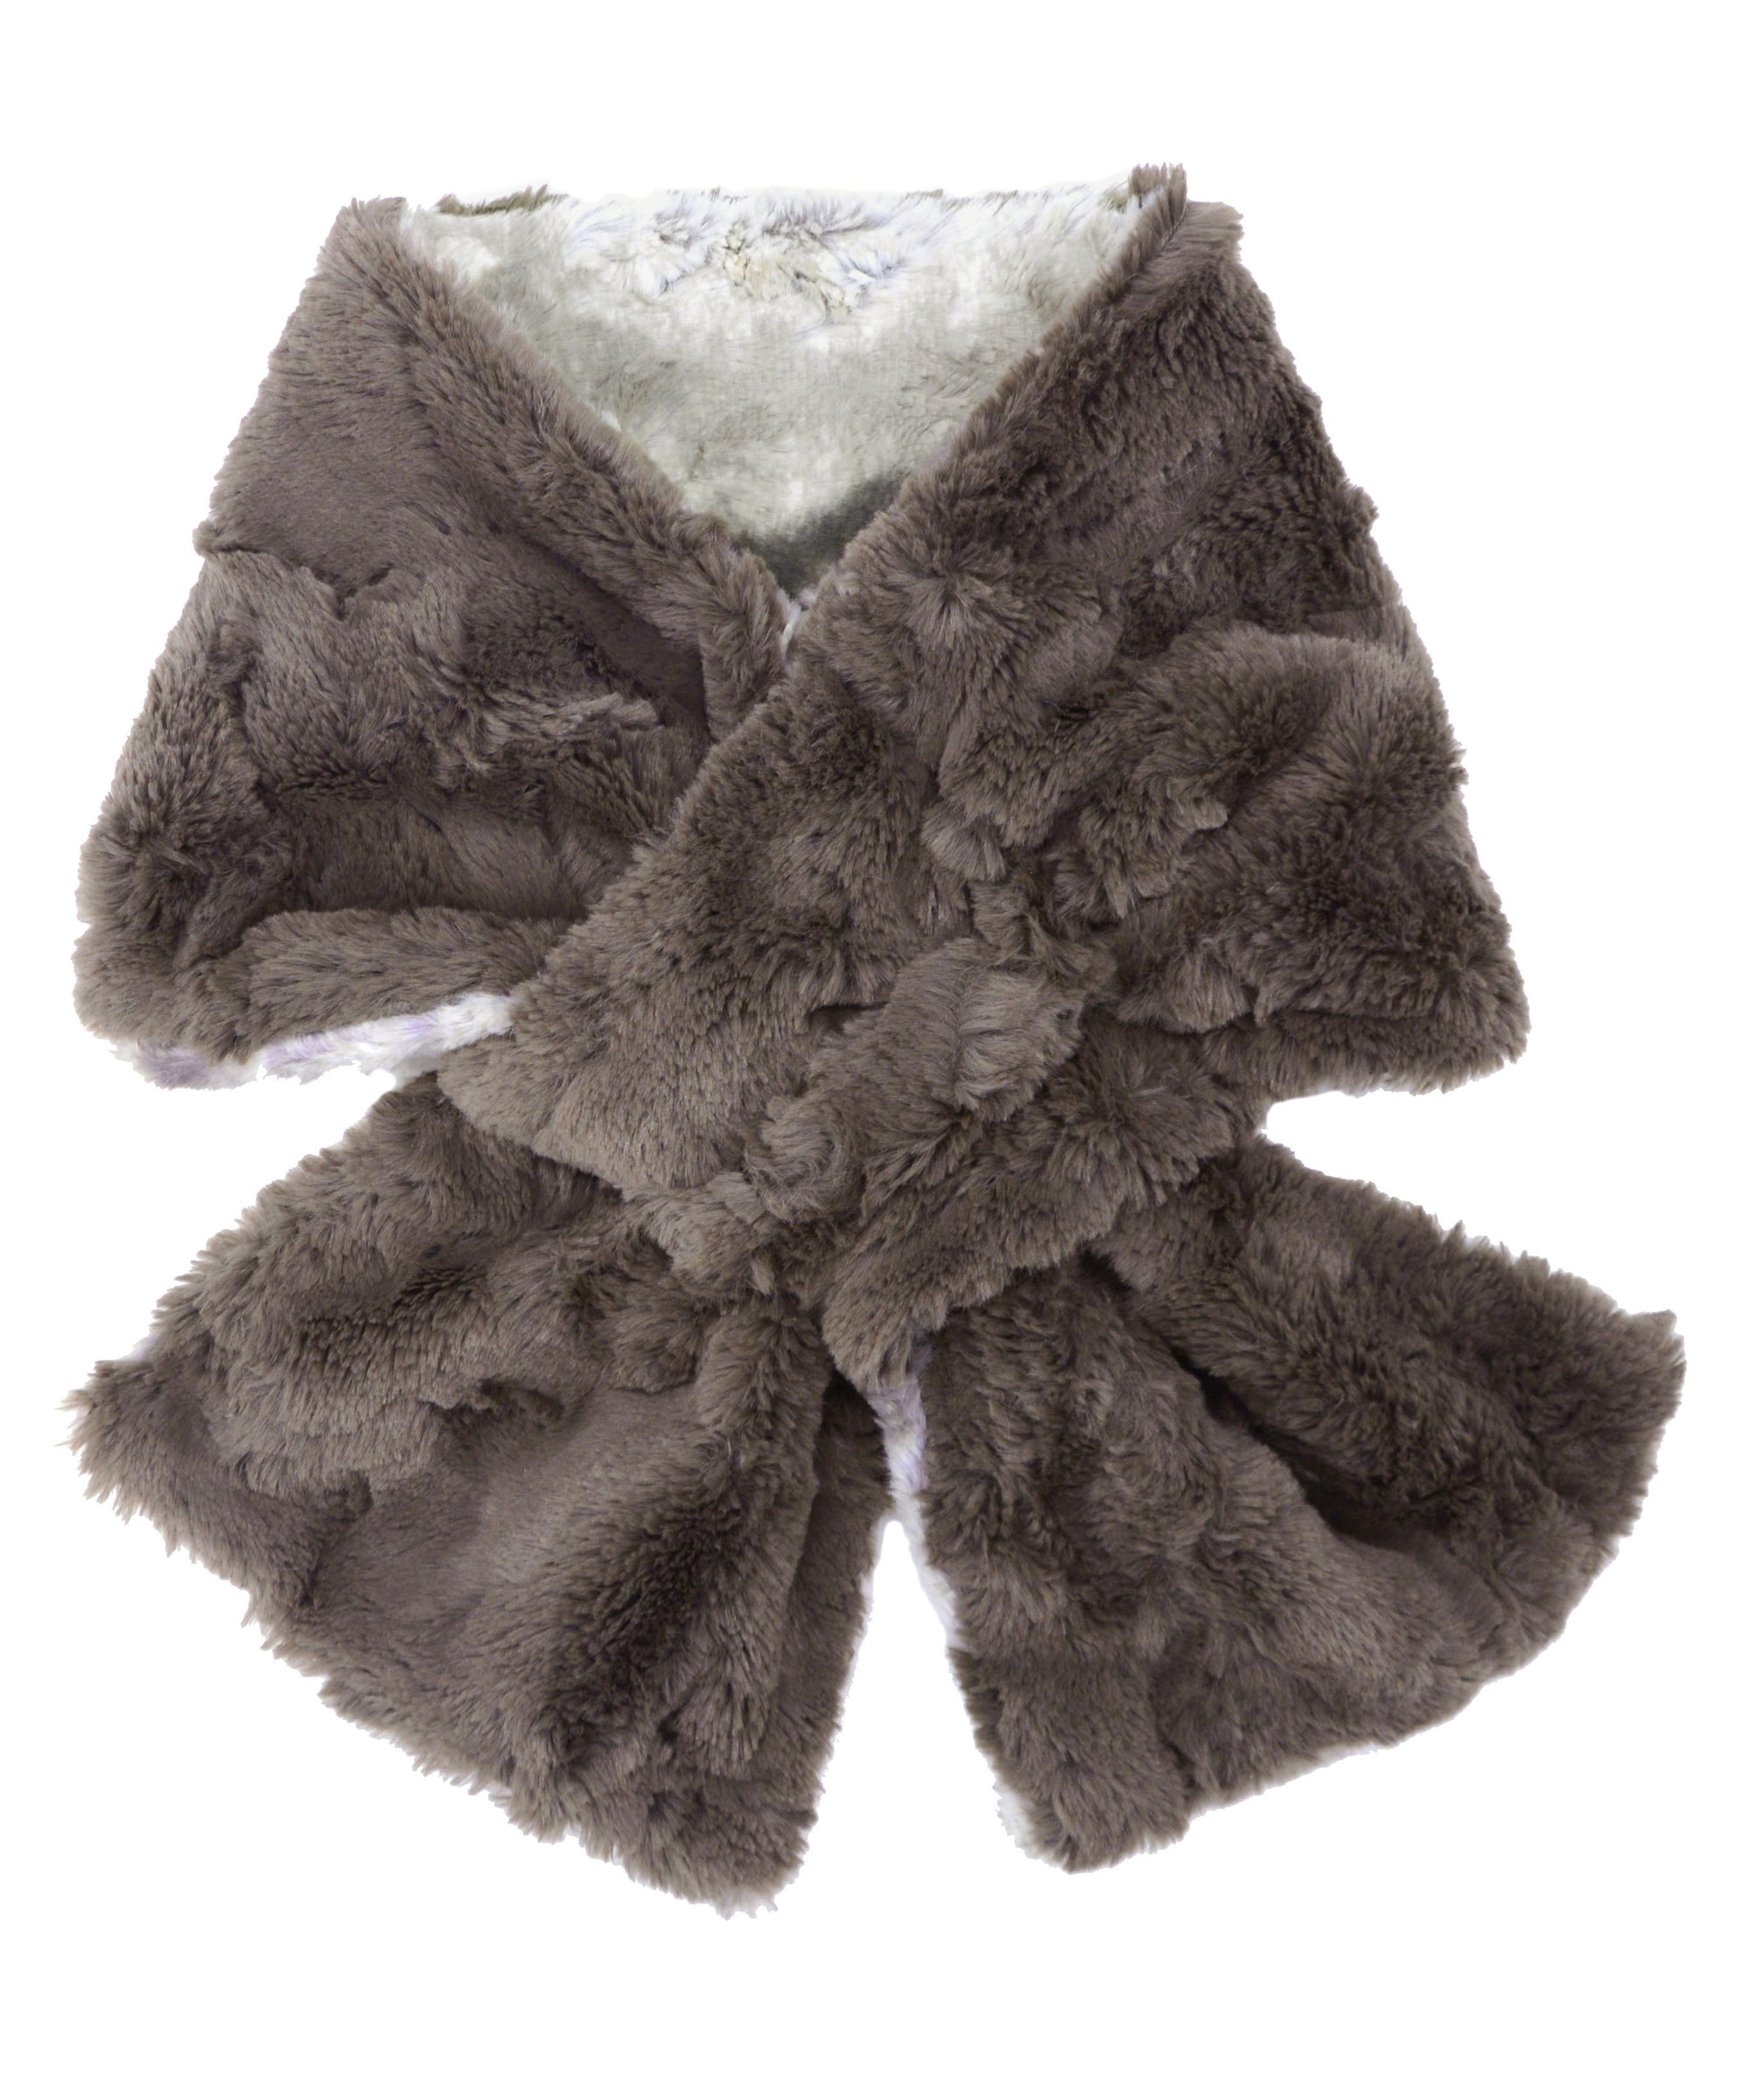 Pull Through Scarf in White Water Faux Fur Handmade in Seattle, WA USA by Pandemonium Millinery